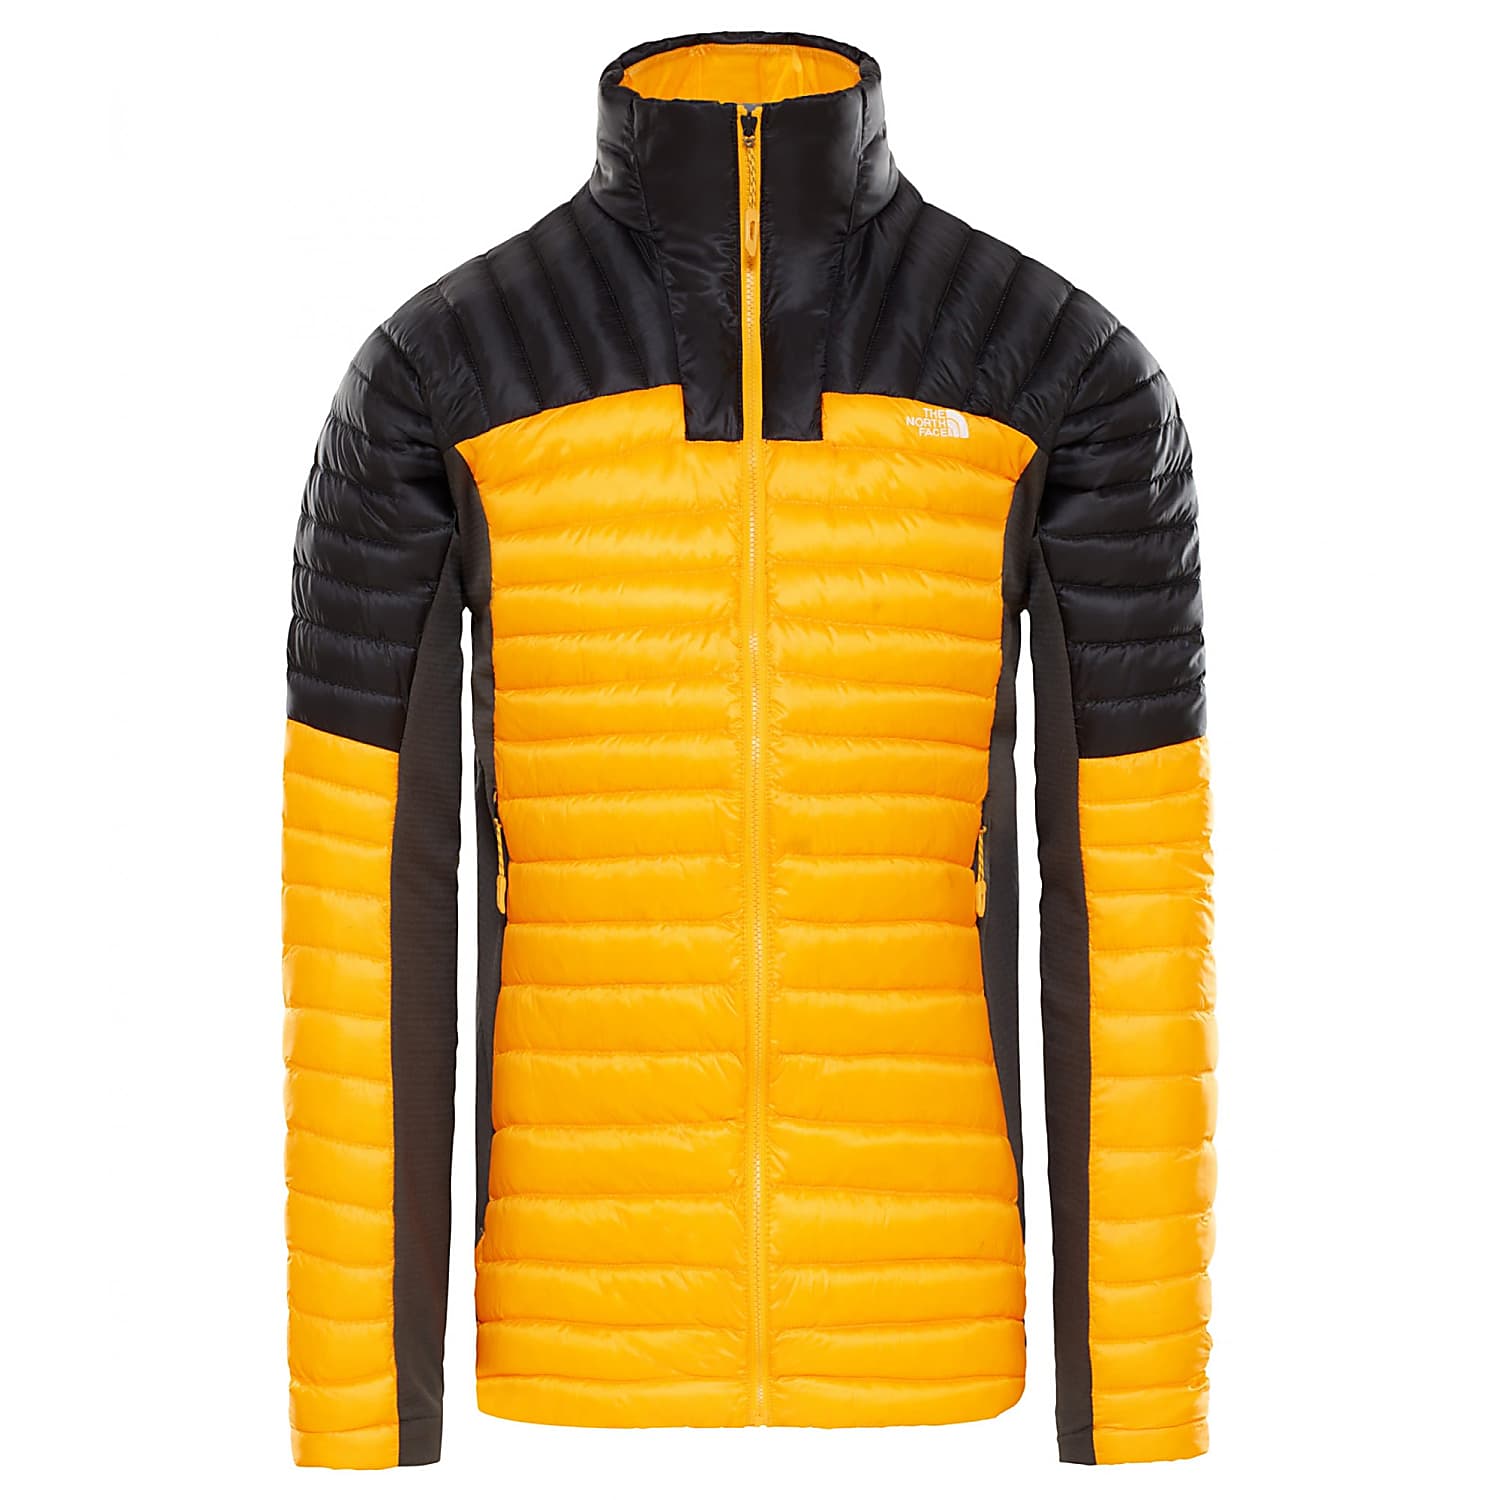 north face impendor down jacket